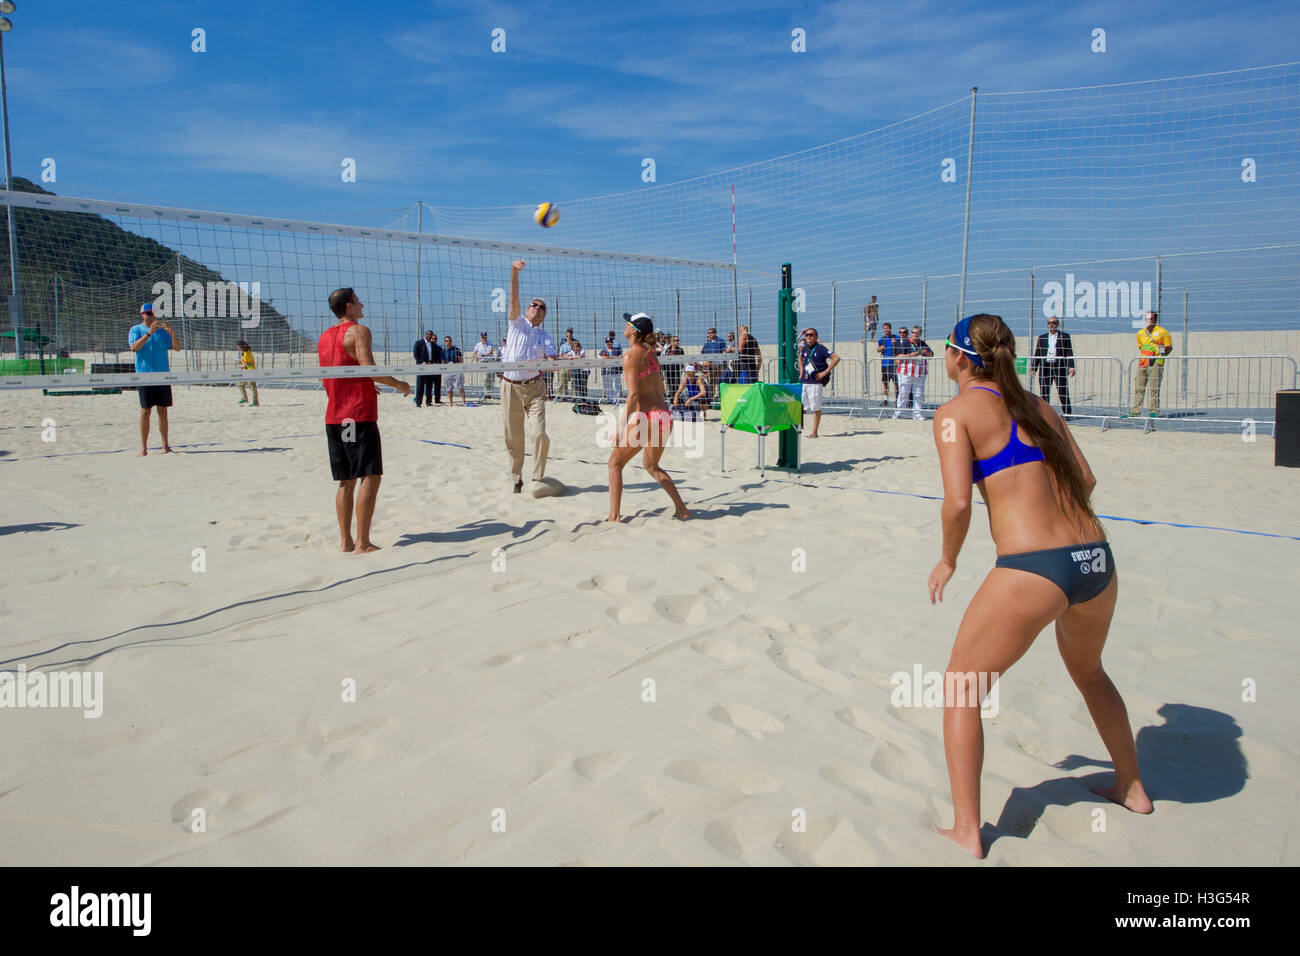 U.S. Secretary of State John Kerry plays with U.S. Olympic women's beach volleyball players on the Copacobana beach in Rio de Janiero, Brazil, on August 6, 2016, as he and his fellow members of the U.S. Presidential Delegation attend the Summer Olympics. Stock Photo